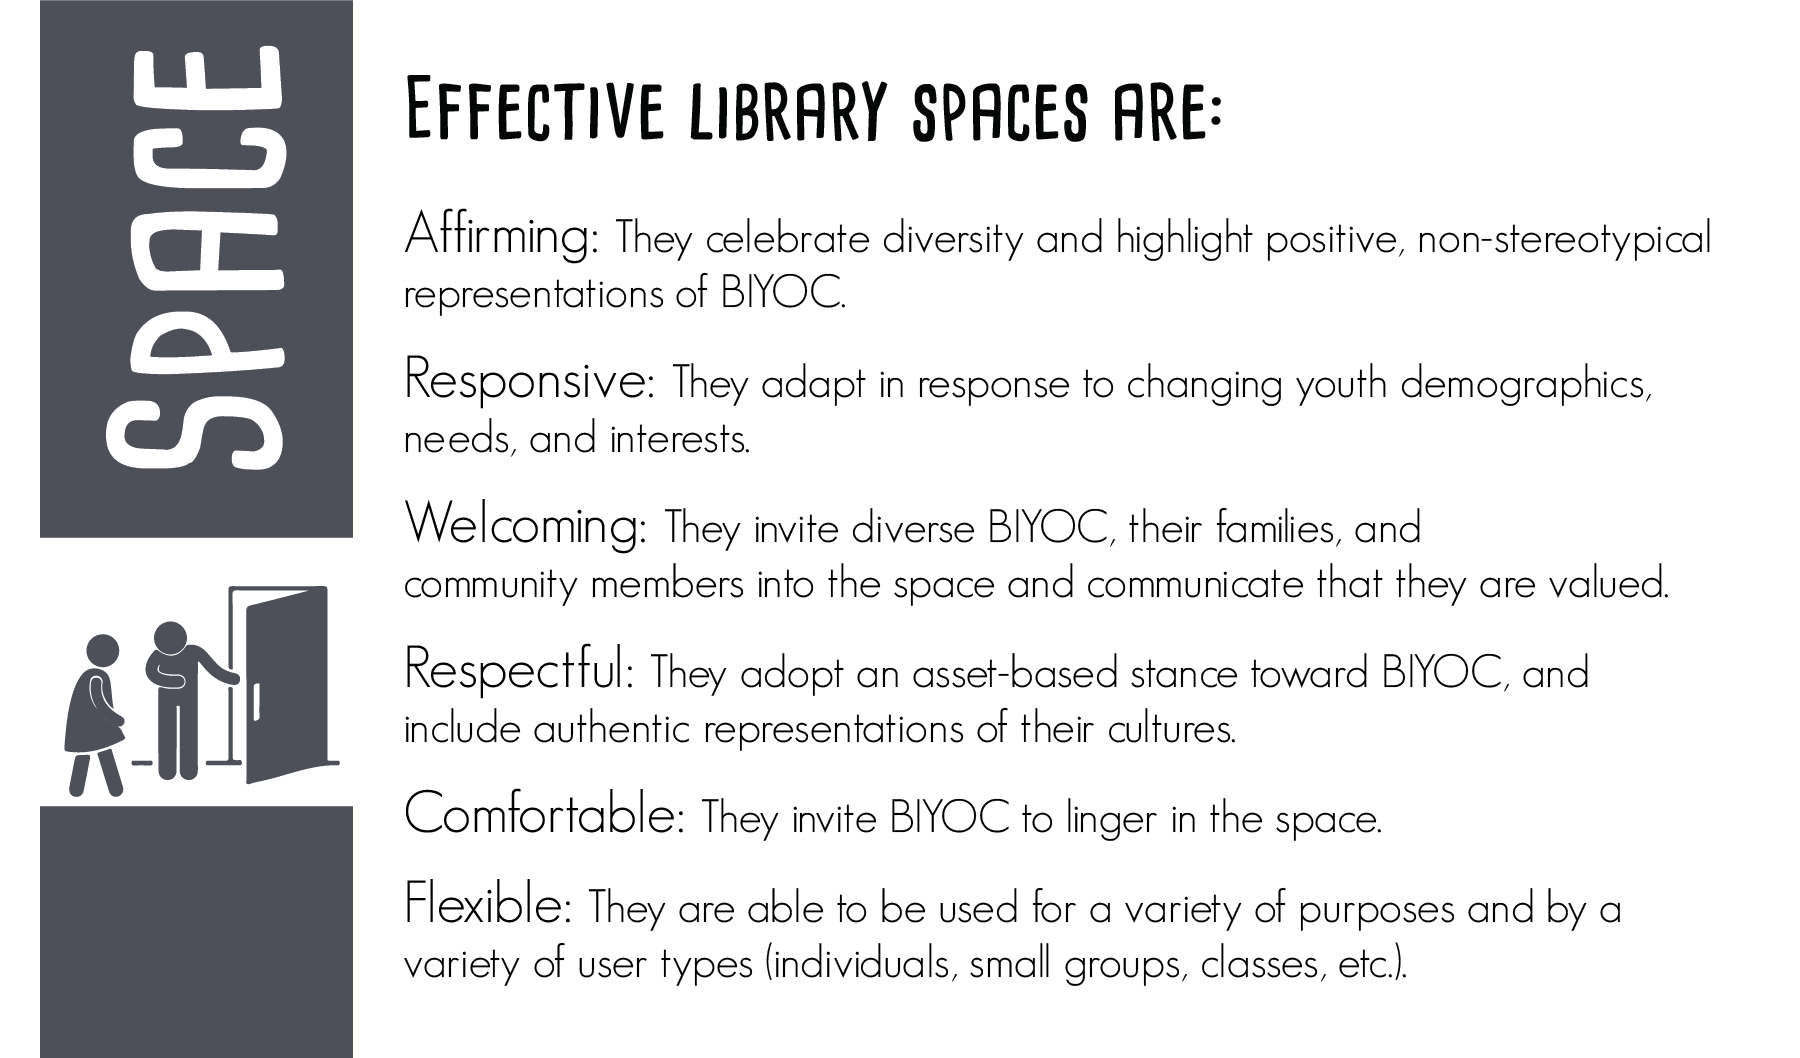 Effective library spaces are: Affirming - They celebrate diversity and highlight positive, non-stereotypical representations of BIYOC. Welcoming - They invite BIYOC, their families, and community members into the space and communicate that they are valued. Respectful - They adopt an asset-based stance toward BIYOC and include authentic representations of their cultures. Comfortable - They invite BIYOC to linger in the space. Flexible - They are able to be used for a variety of purposes and by a variety of user types (individuals, small groups, classes, etc.).